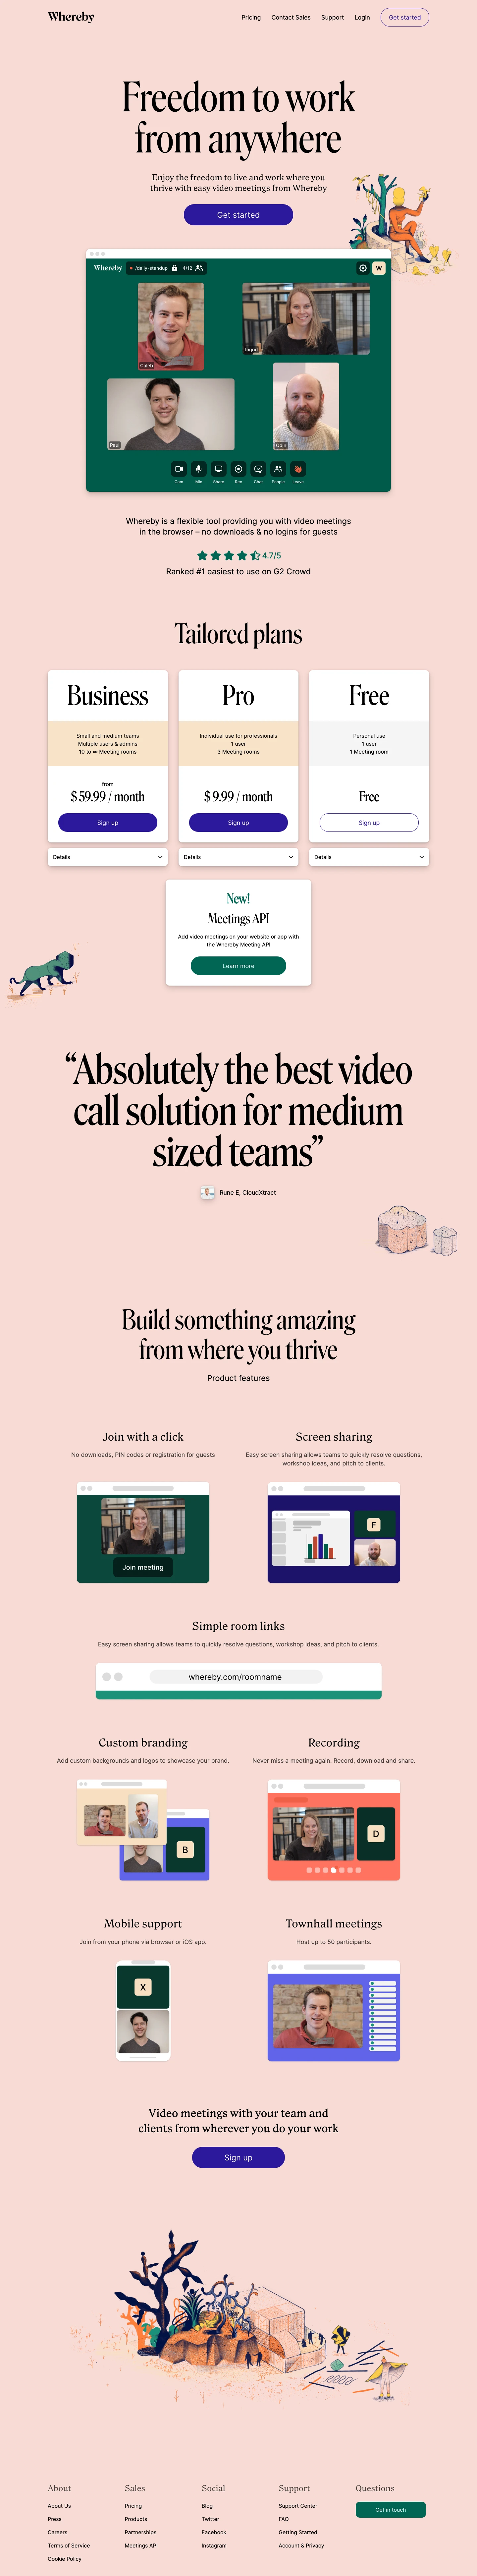 Whereby Landing Page Example: Freedom to workfrom anywhere. Enjoy the freedom to live and work where you thrive with easy video meetings from Whereby.